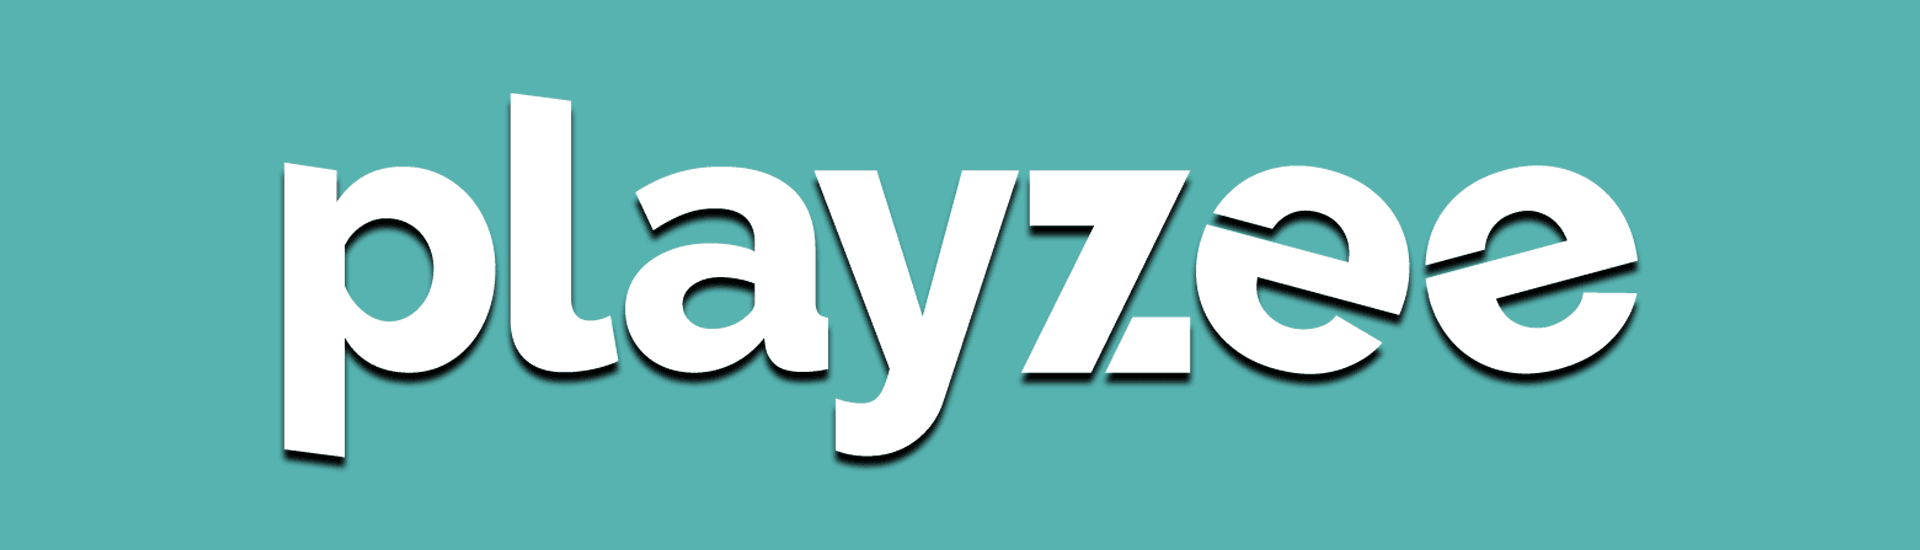 Playzee Featured Image